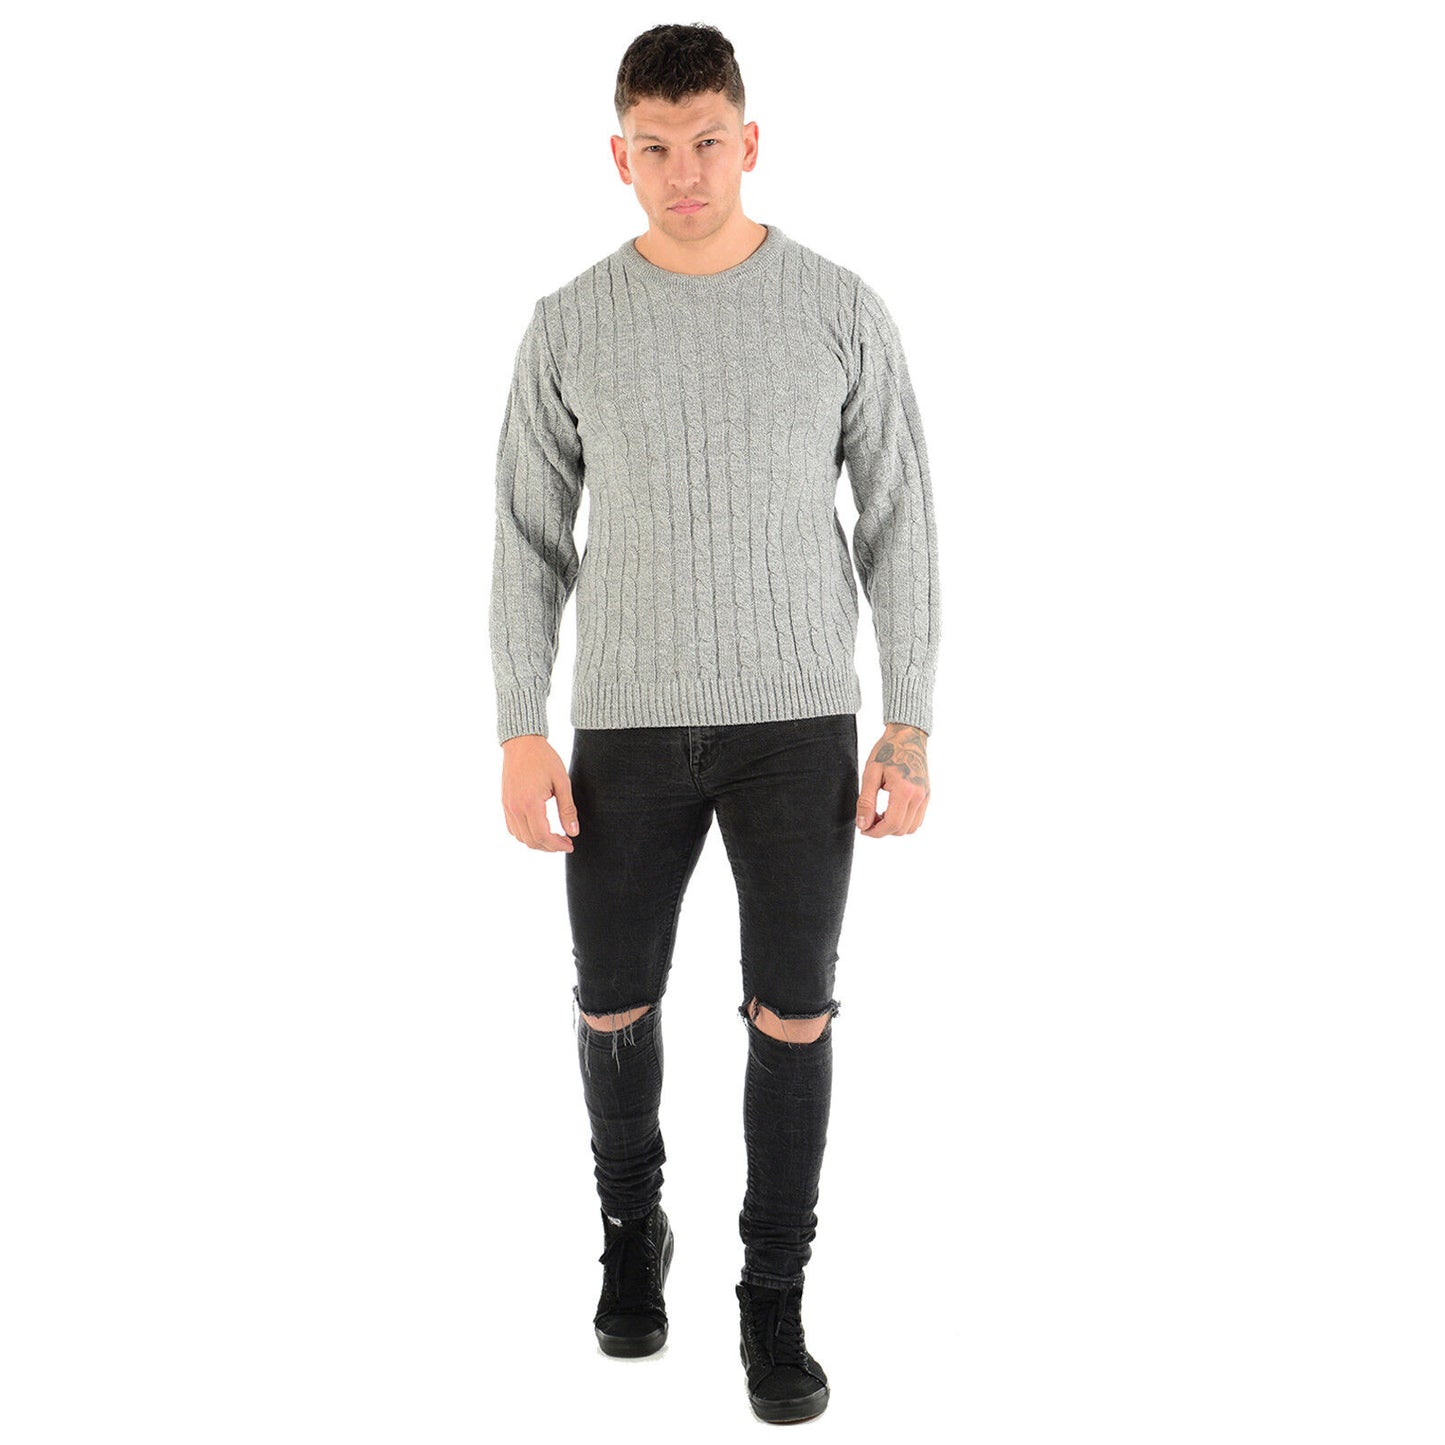 MENS CHUNKY CABLE KNIT JUMPER PLAIN PULLOVER THICK WARM WINTER KNITTED SWEATER